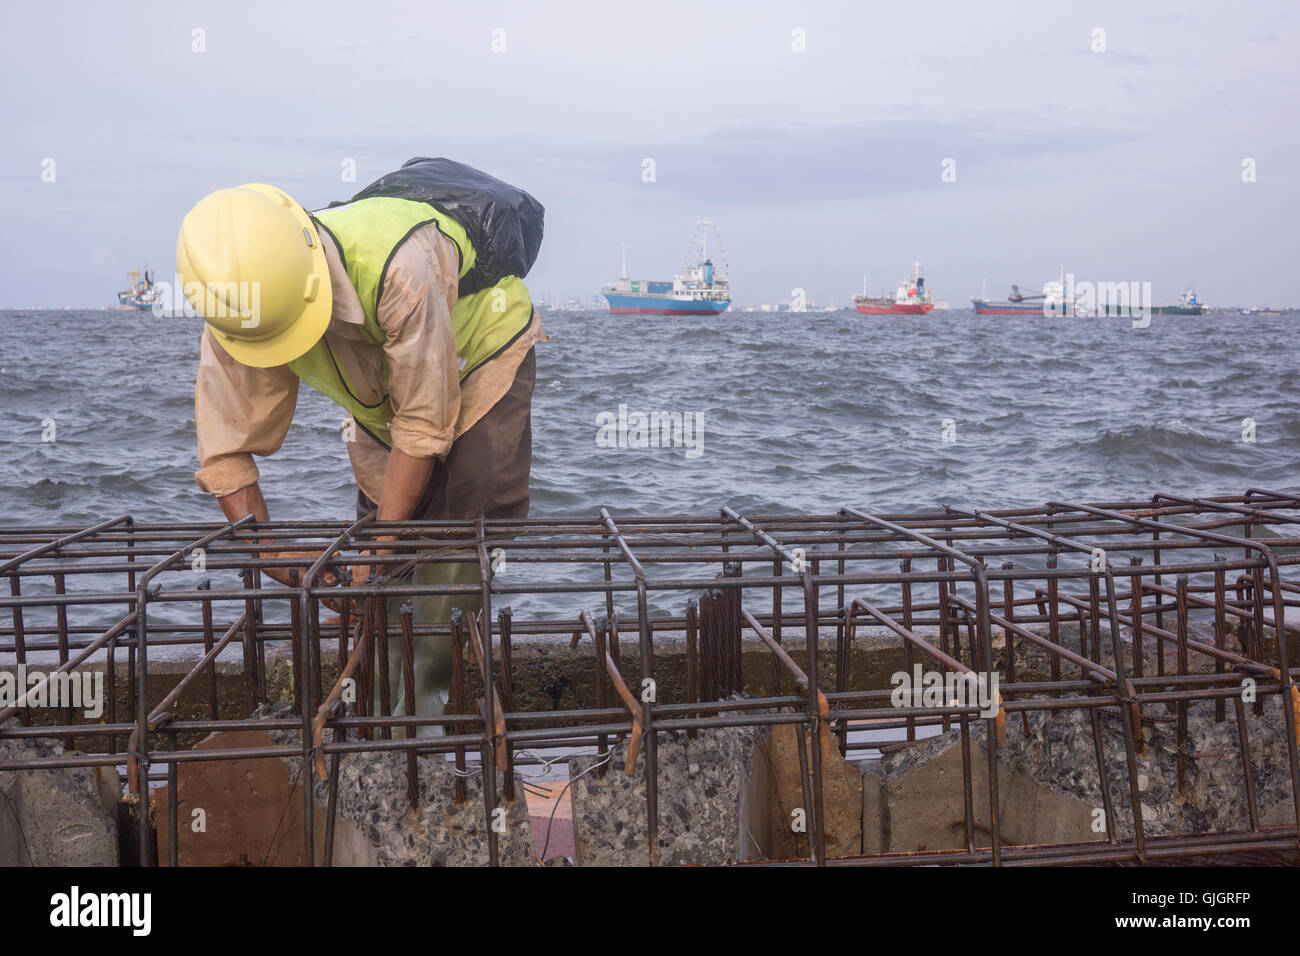 North Jakarta, Indonesia. 16th Aug, 2016. A worker contruct the new Jakarta's giant sea wall. Jakarta sinking by between 7.5 and 17 centimetres a year, more than 10 times faster than the sea is rising. Governments will split the 3.2 trillion rupiah ($263 million) cost for the first 8 kilometres of the wall. Developers would put up the remaining 24 kilometres by 2030 in exchange for the right to build on reclaimed land. © Anton Raharjo/Pacific Press/Alamy Live News Stock Photo